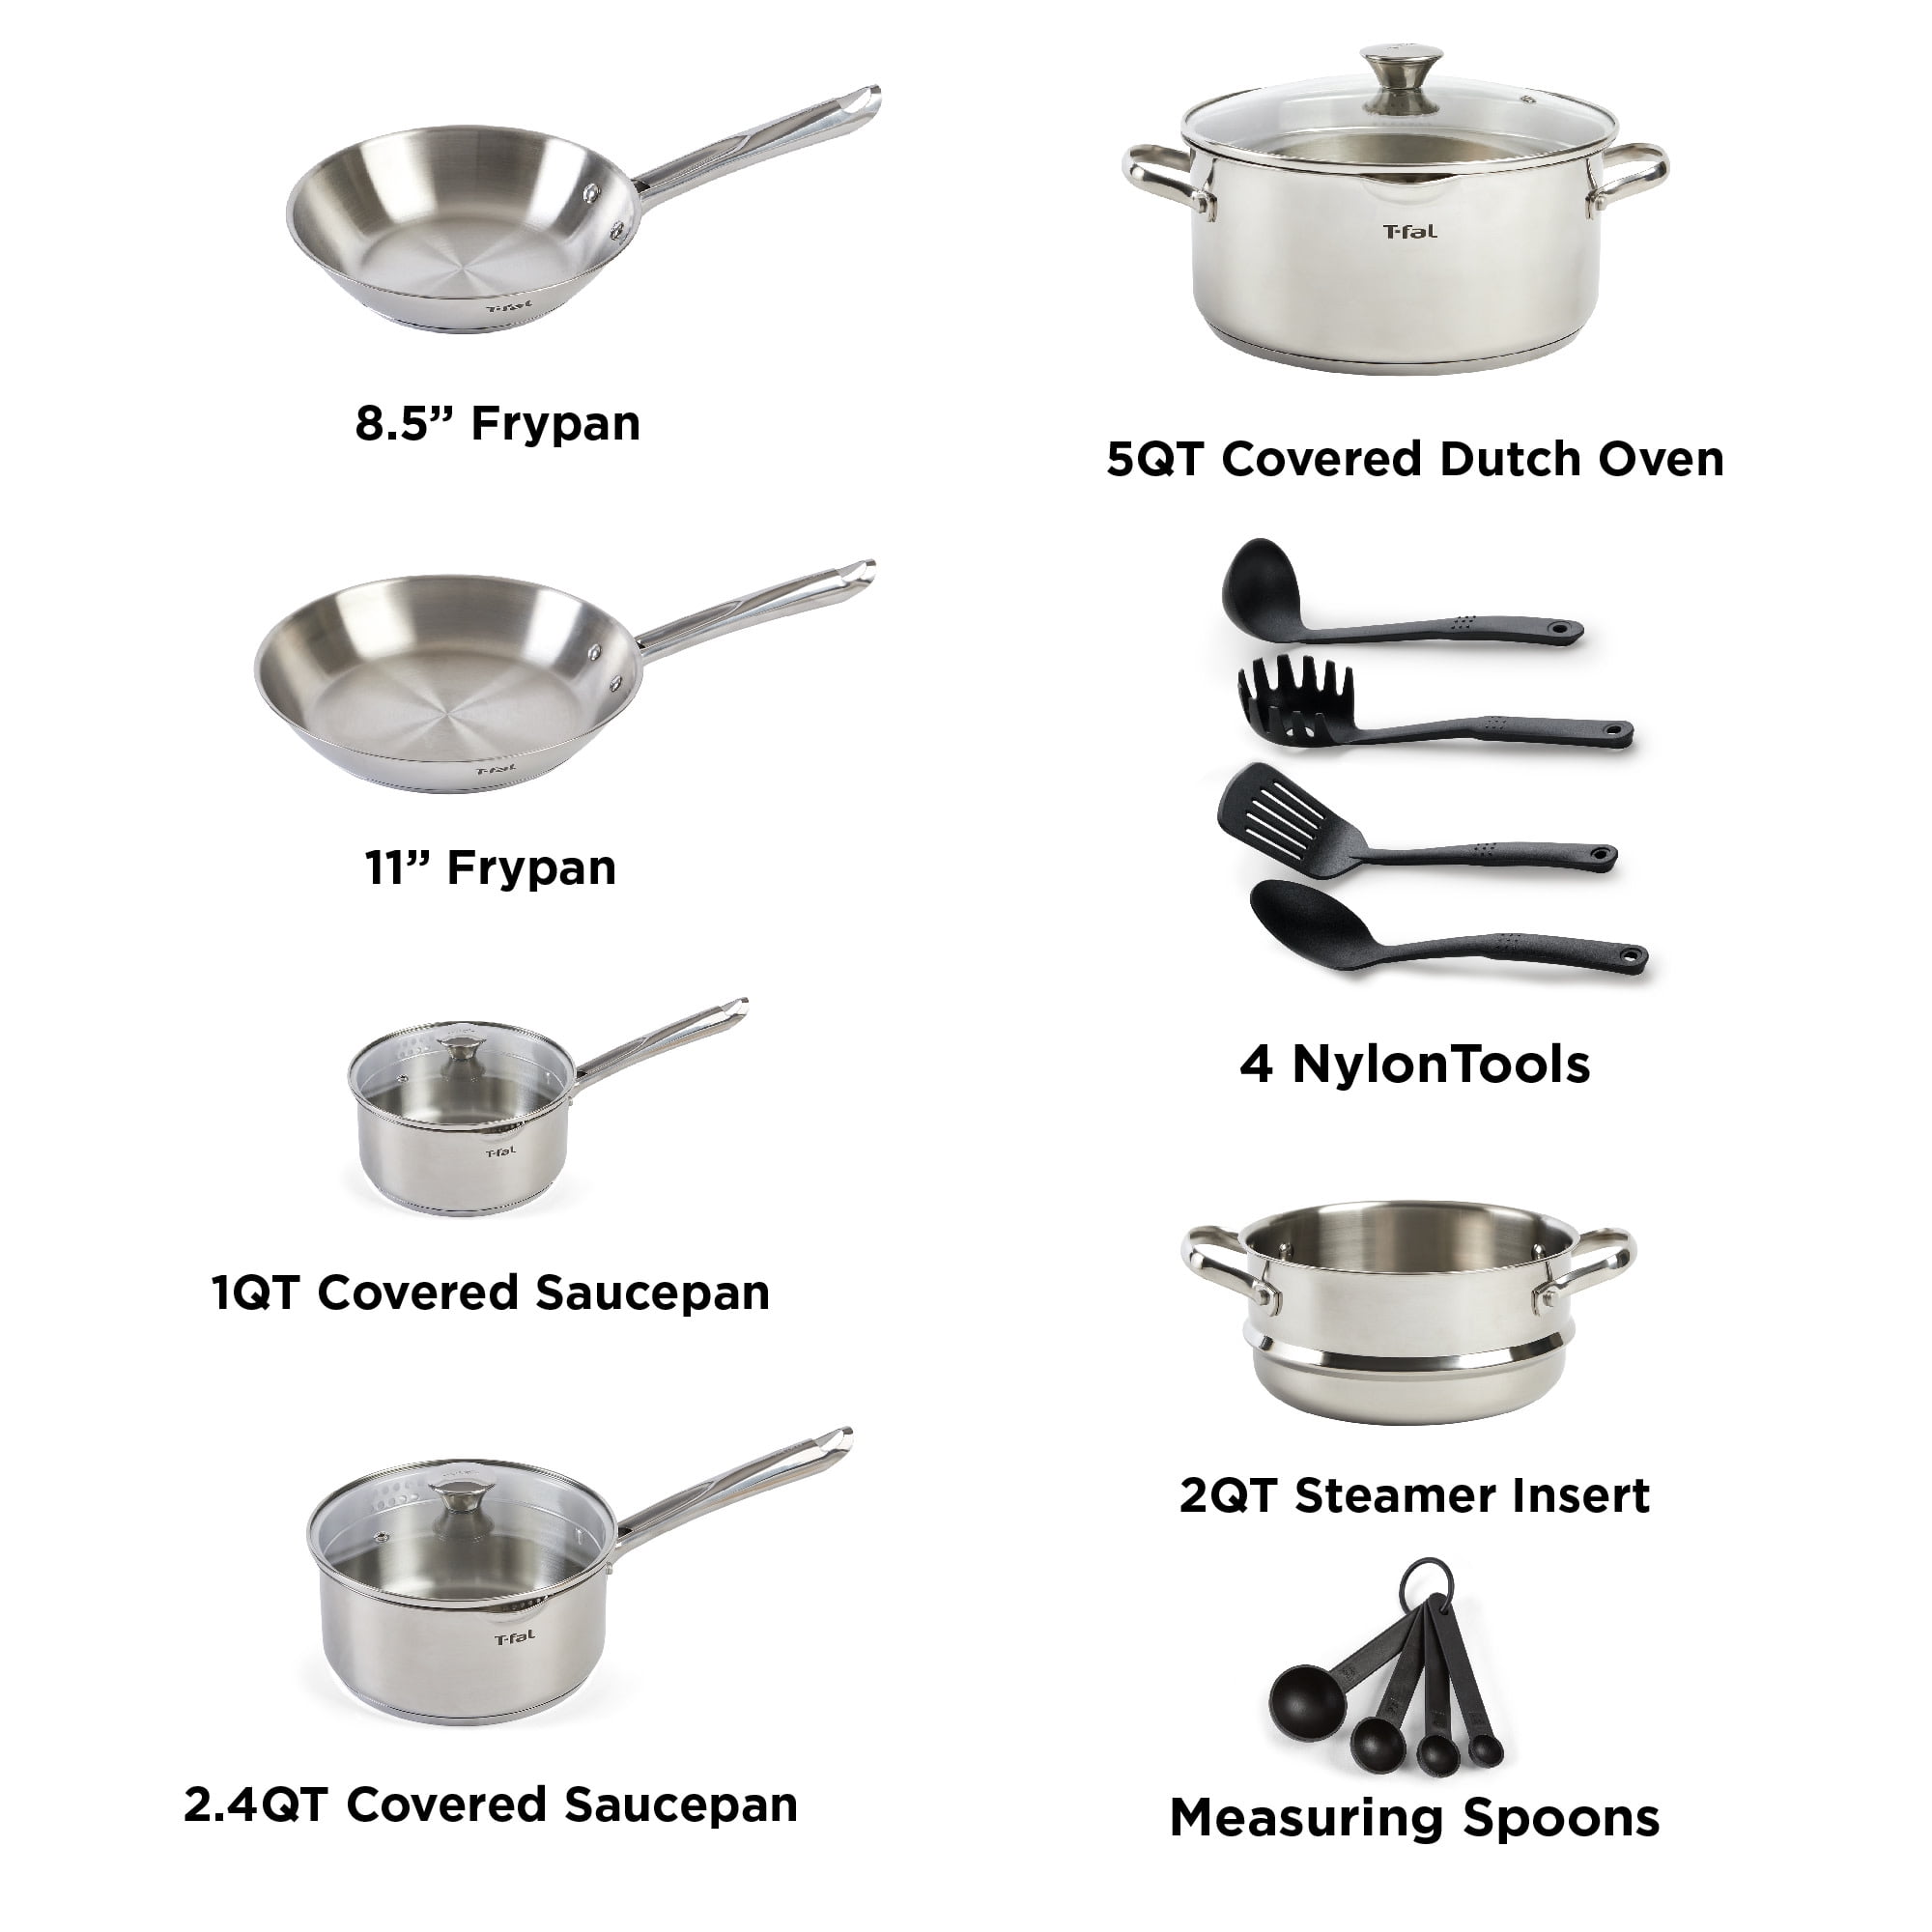 T-fal Cook & Strain Stainless Steel Cookware Set, 10 pc - Fry's Food Stores